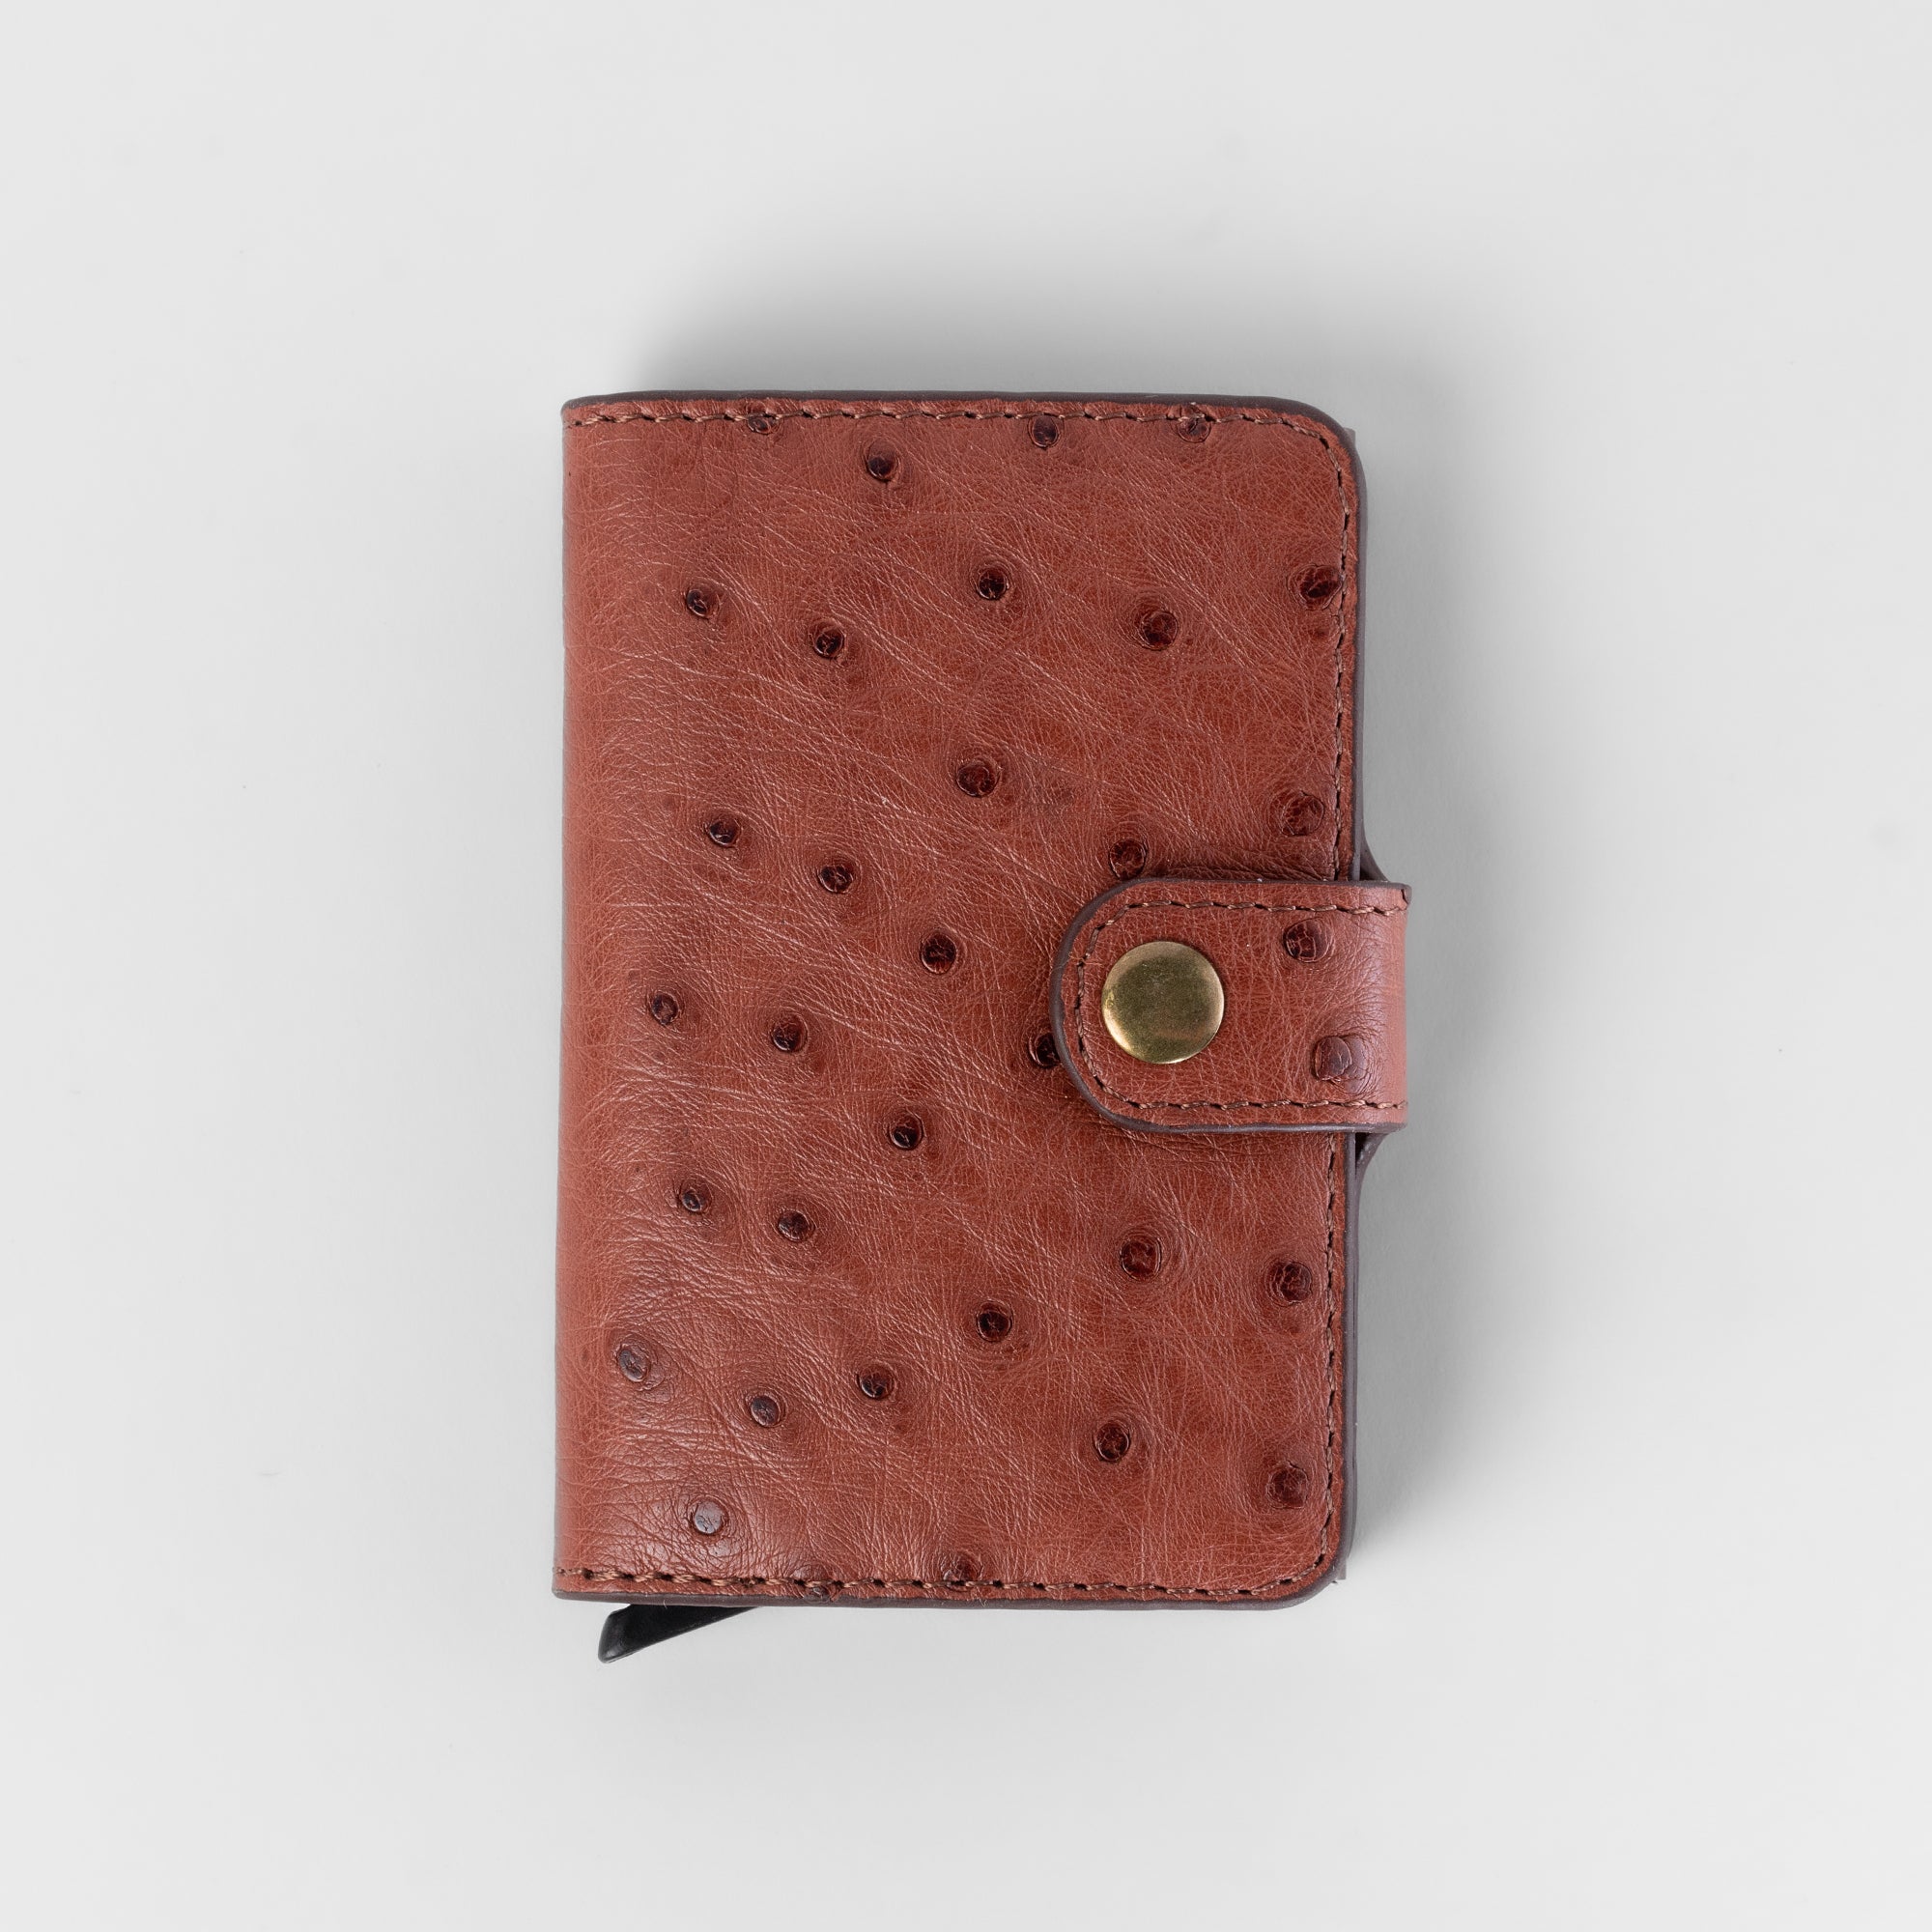 Agustine, Ostrich Leather Quick Card Access Wallet